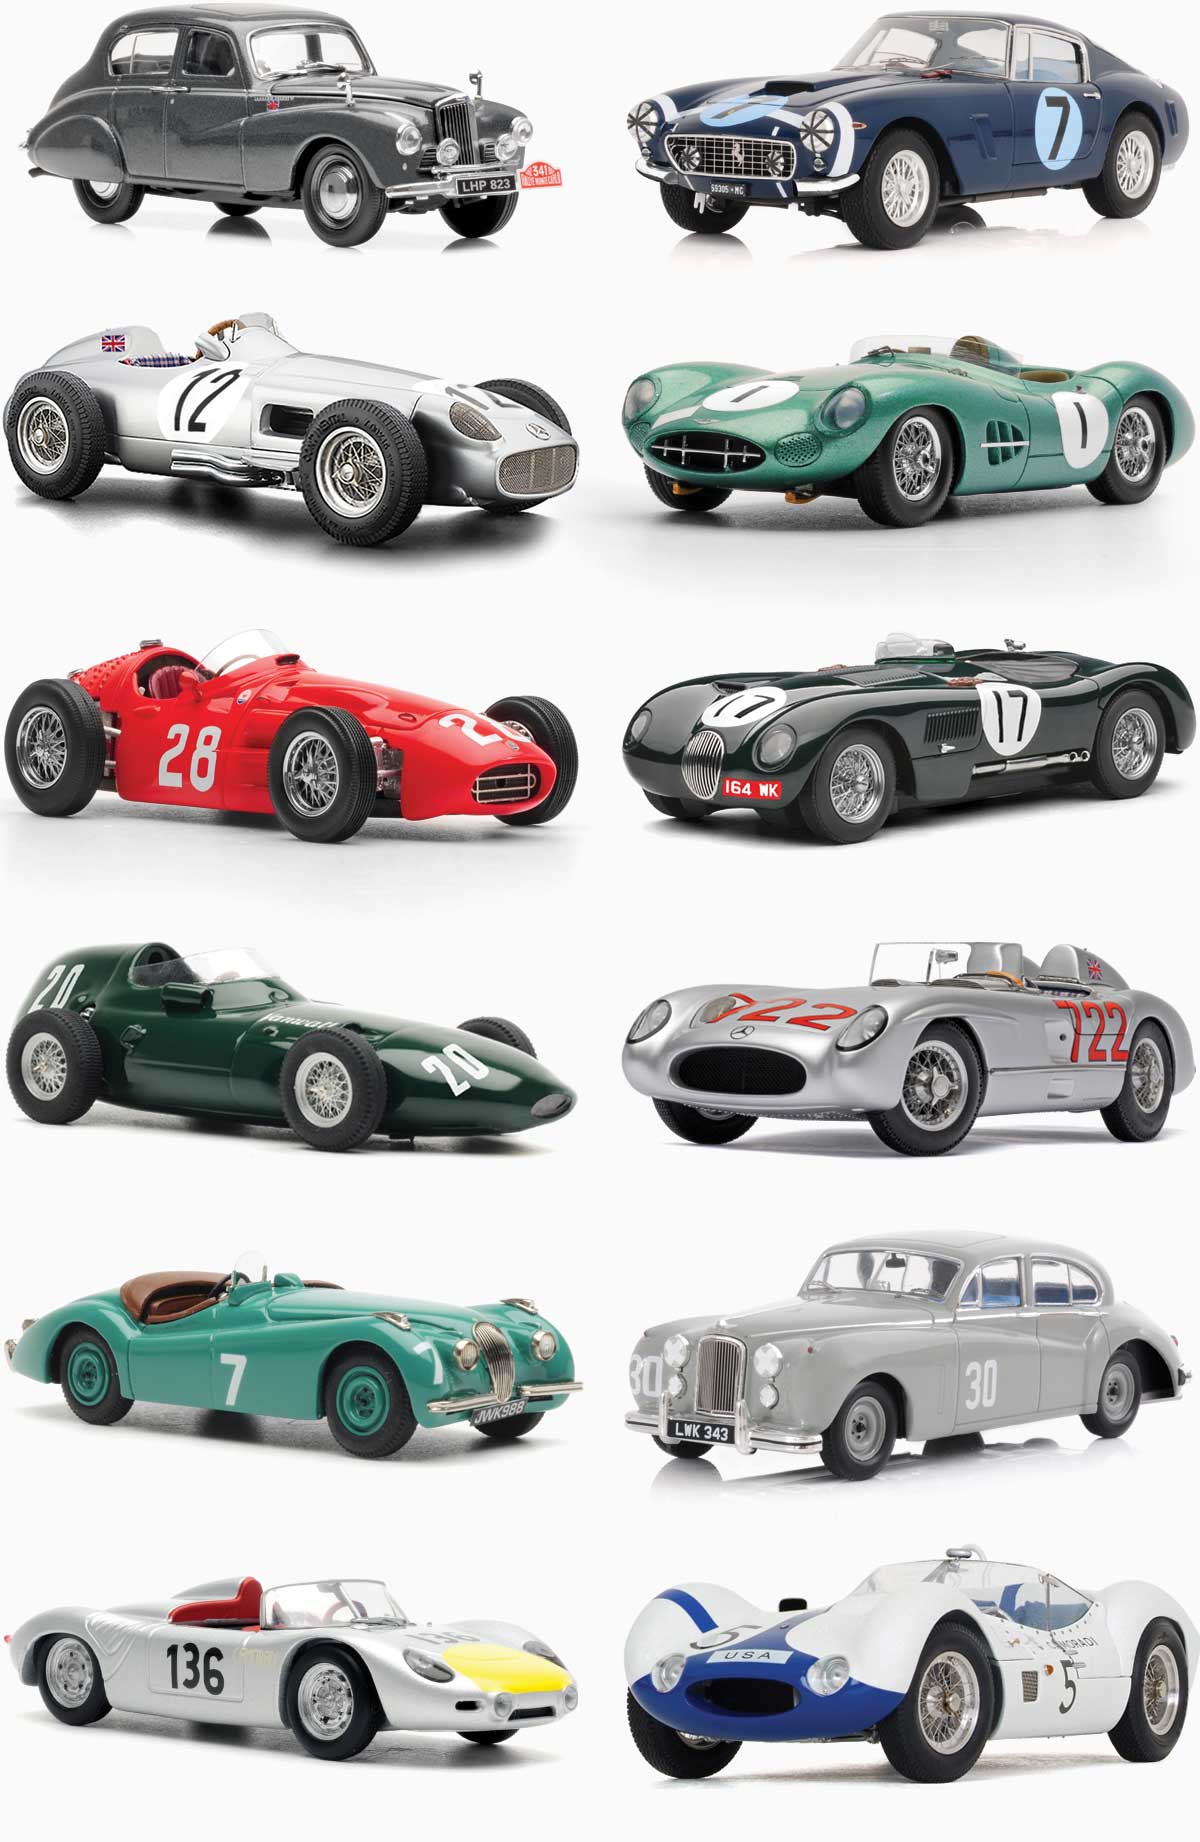 Sir Stirling Moss 722 Collection subjects